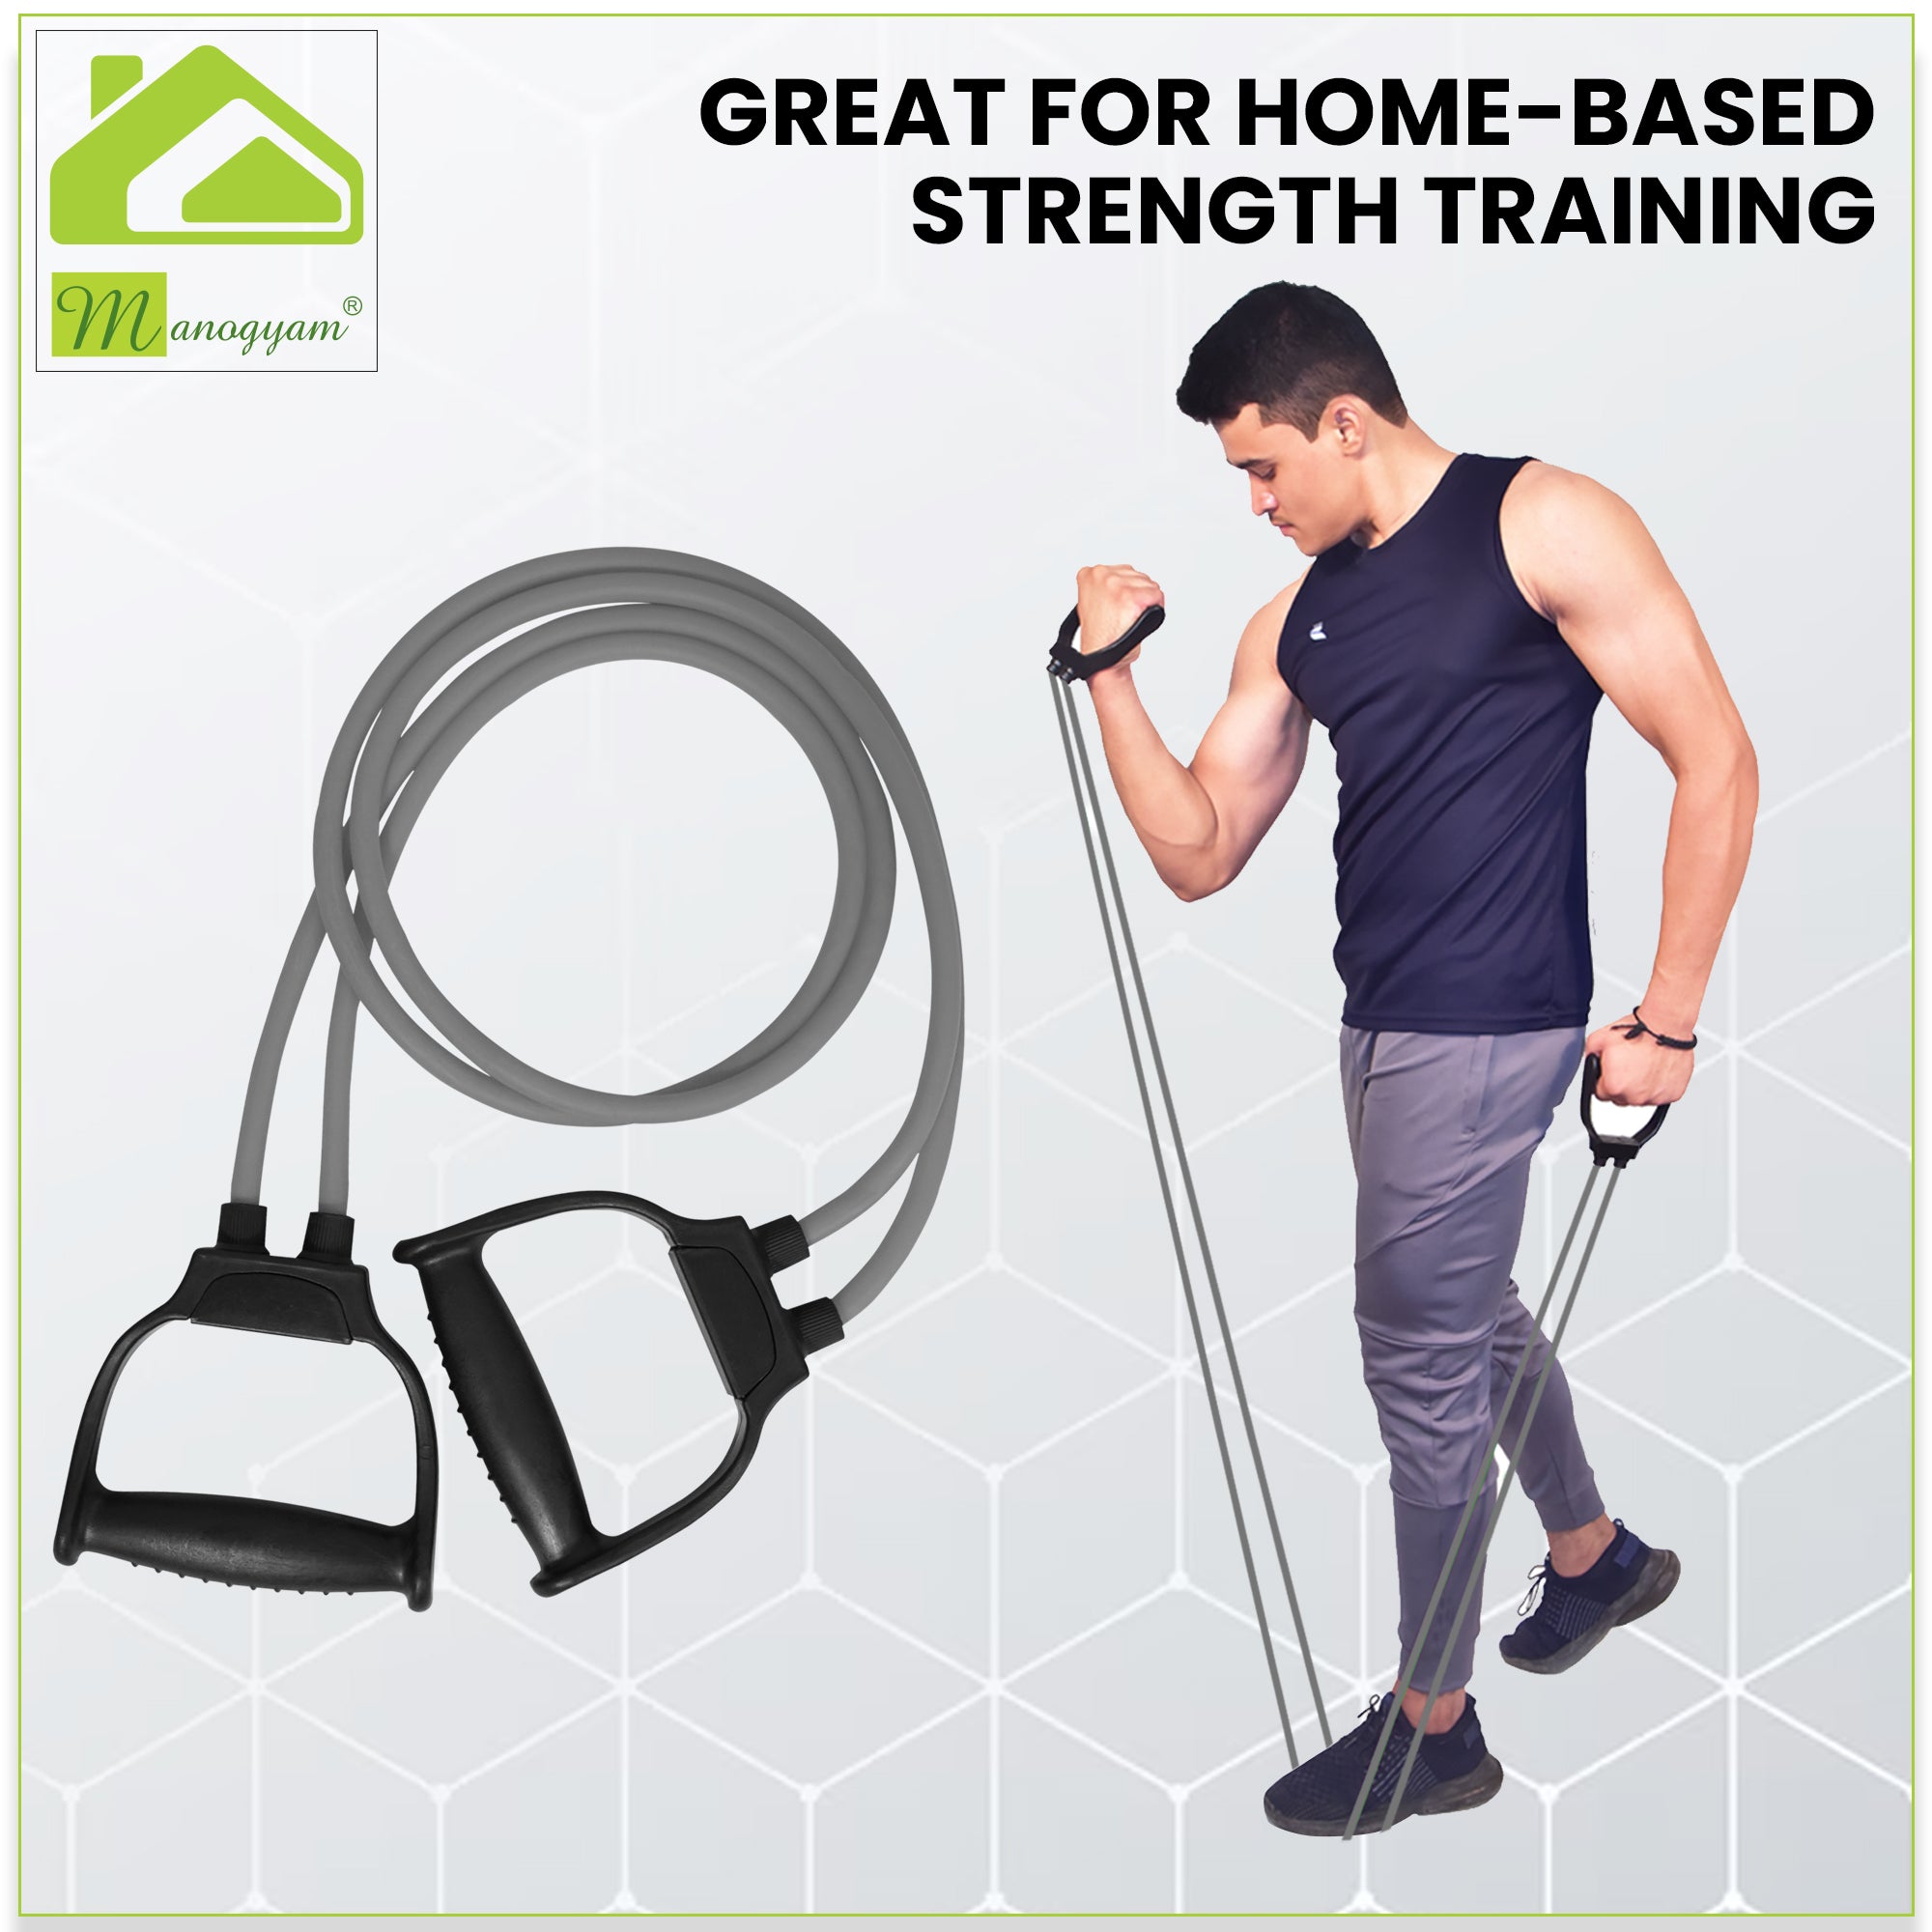 MRKHILADI Resistance band for Physical Therapy, Stretching & Home